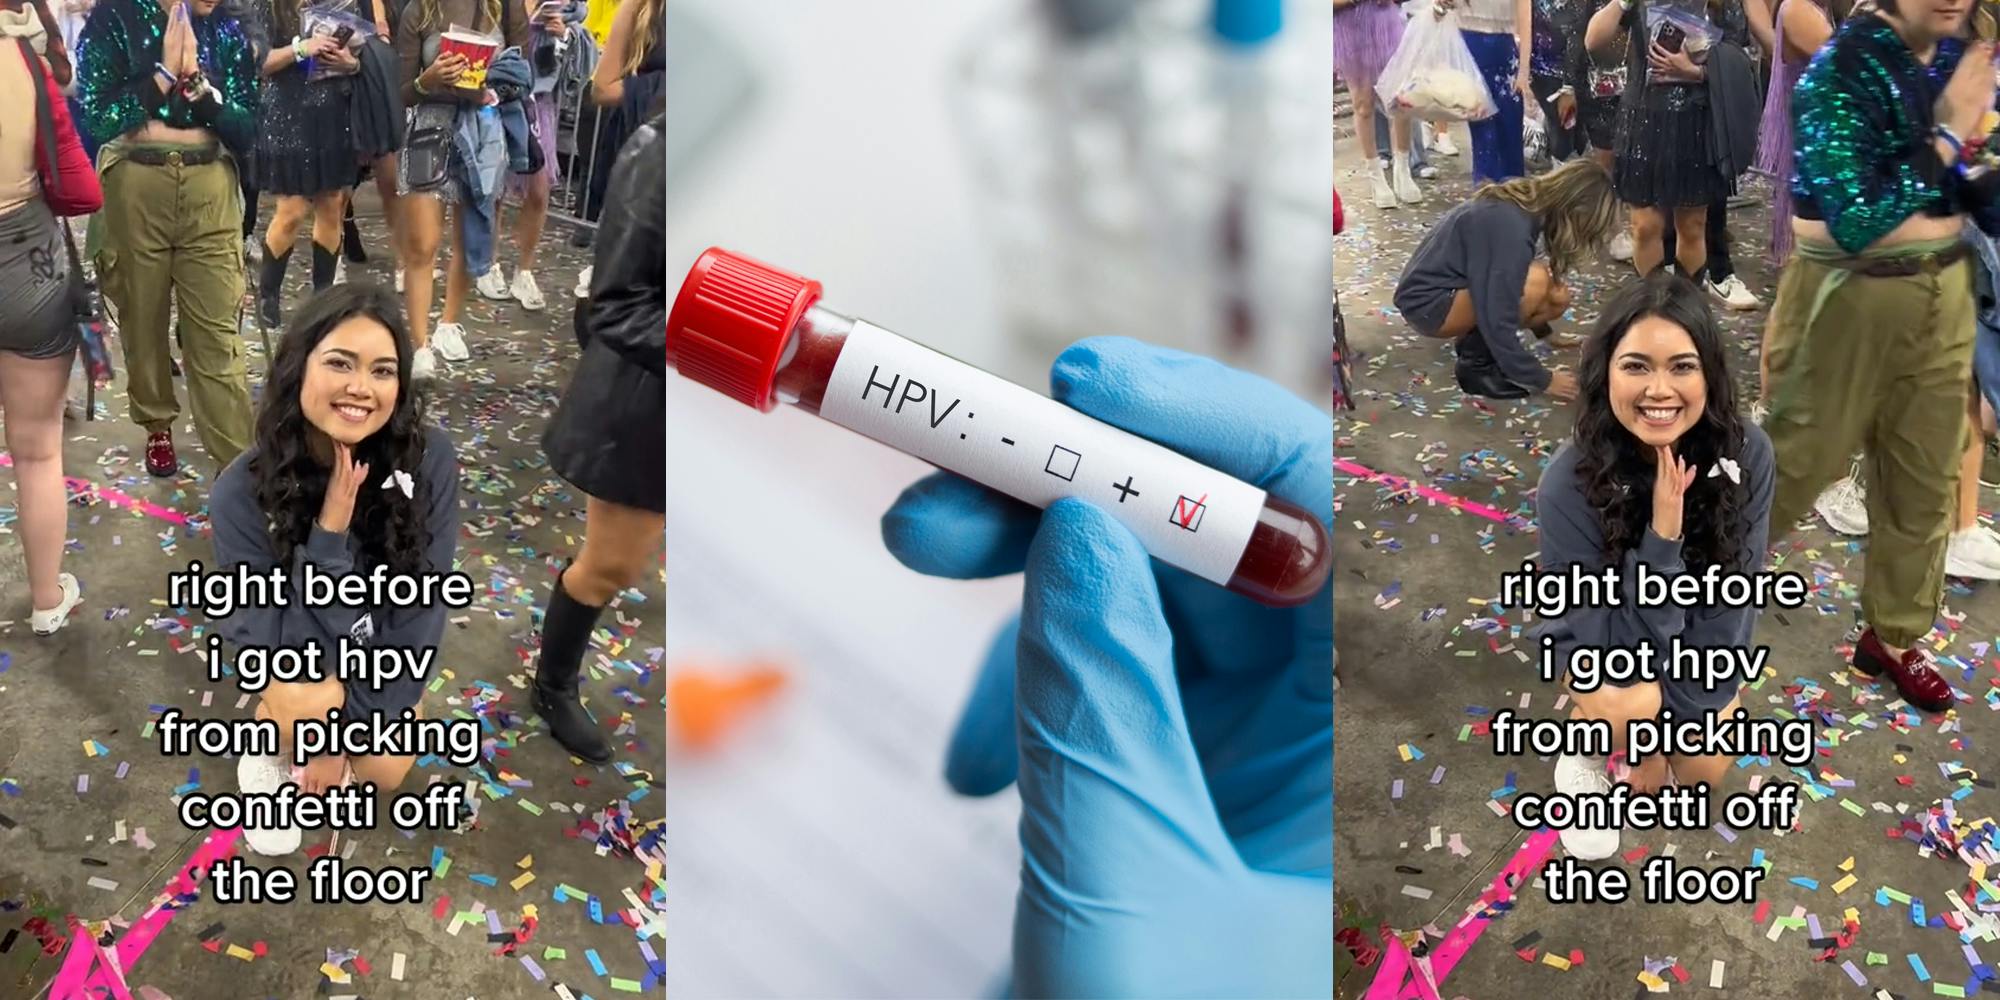 woman kneeling on floor with confetti in crowd with caption "right before i got hpv from picking confetti off the floor" (l) gloved hand holding HPV blood sample (c) woman kneeling on floor with confetti in crowd with caption "right before i got hpv from picking confetti off the floor" (r)